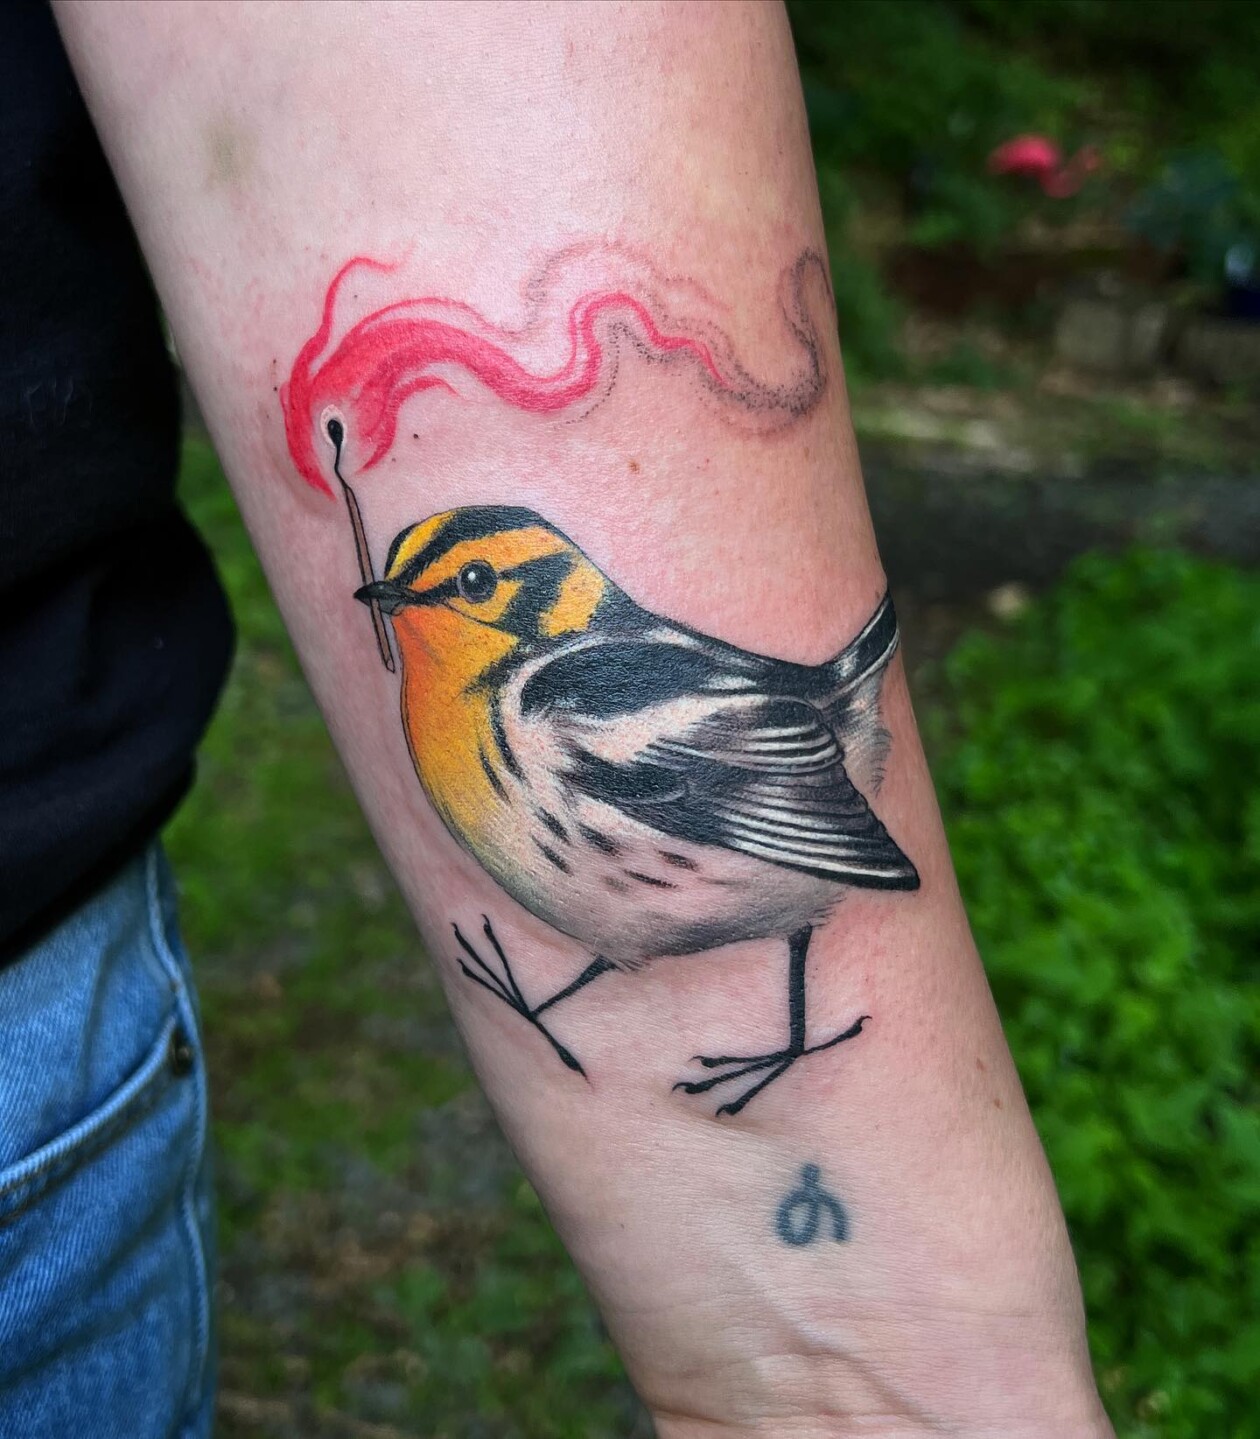 Stephanie Brown Creates Whimsical Tattoos Of Birds Holding A Lit Match Symbolizing Hope For A Better Future (7)